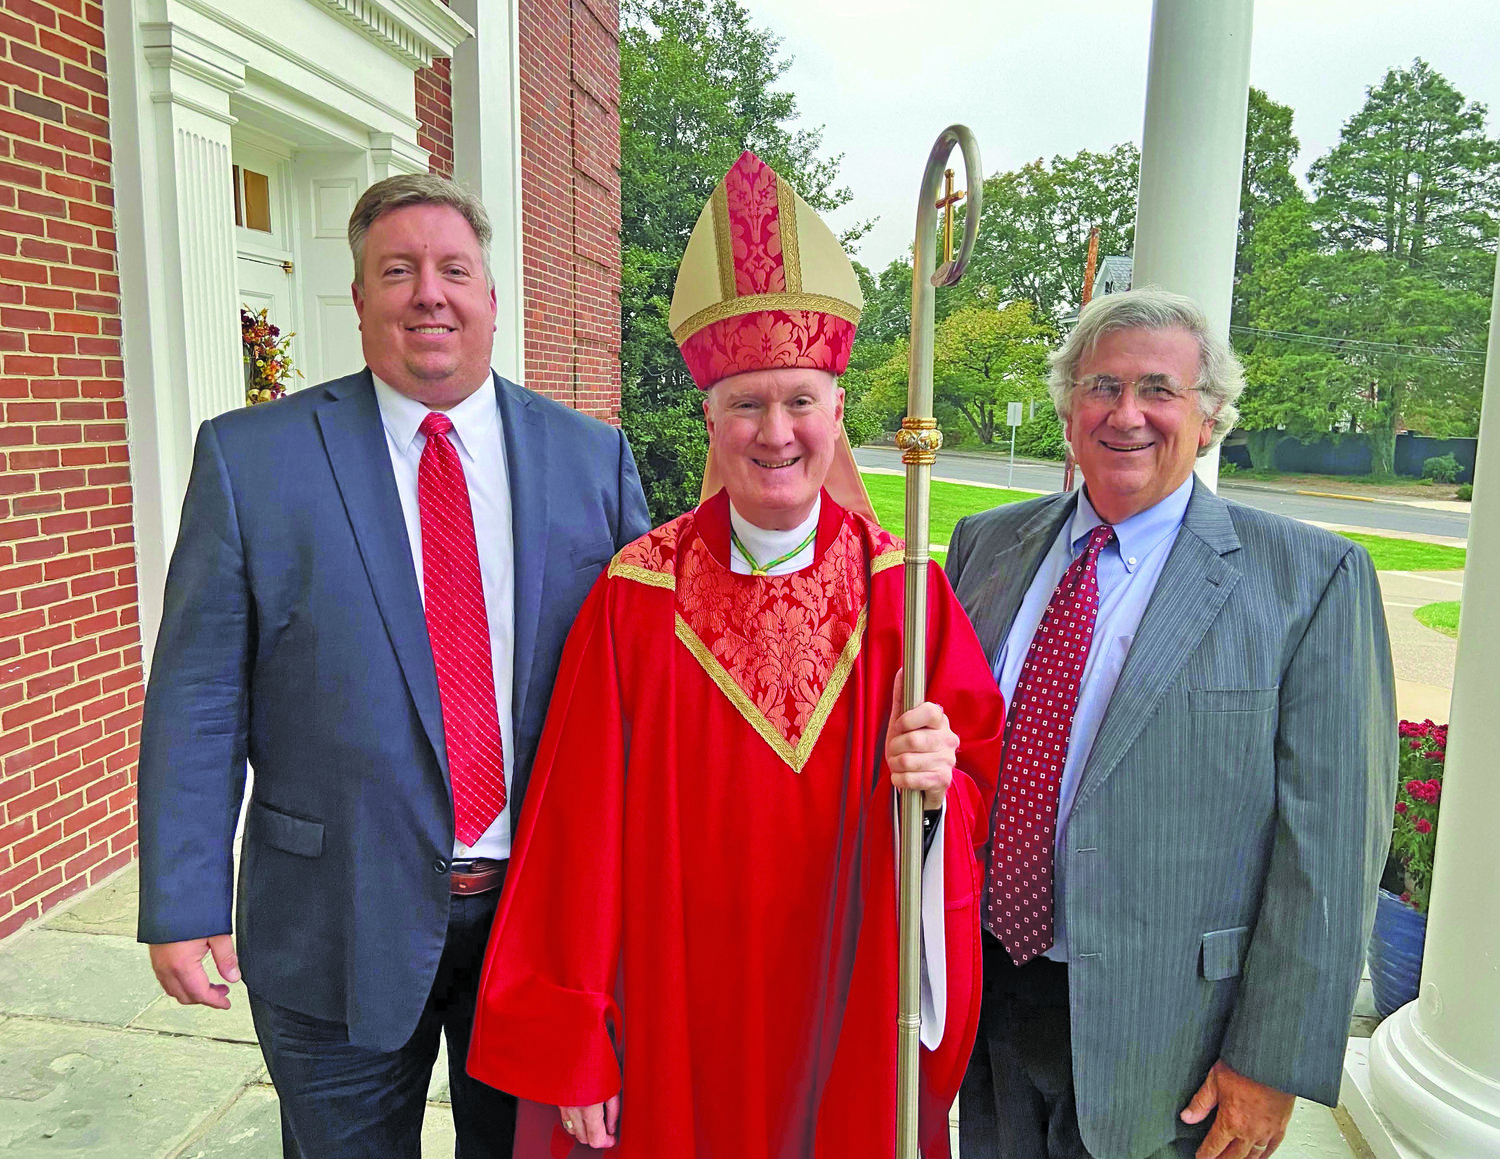 From left are: Sean Gresh, president, Bucks County Bar Association; the Most Rev. Michael J. Fitzgerald, auxiliary bishop of Philadelphia overseeing Catholic Education; President Judge Wallace H. Bateman, Jr., Bucks County Court of Common Pleas.